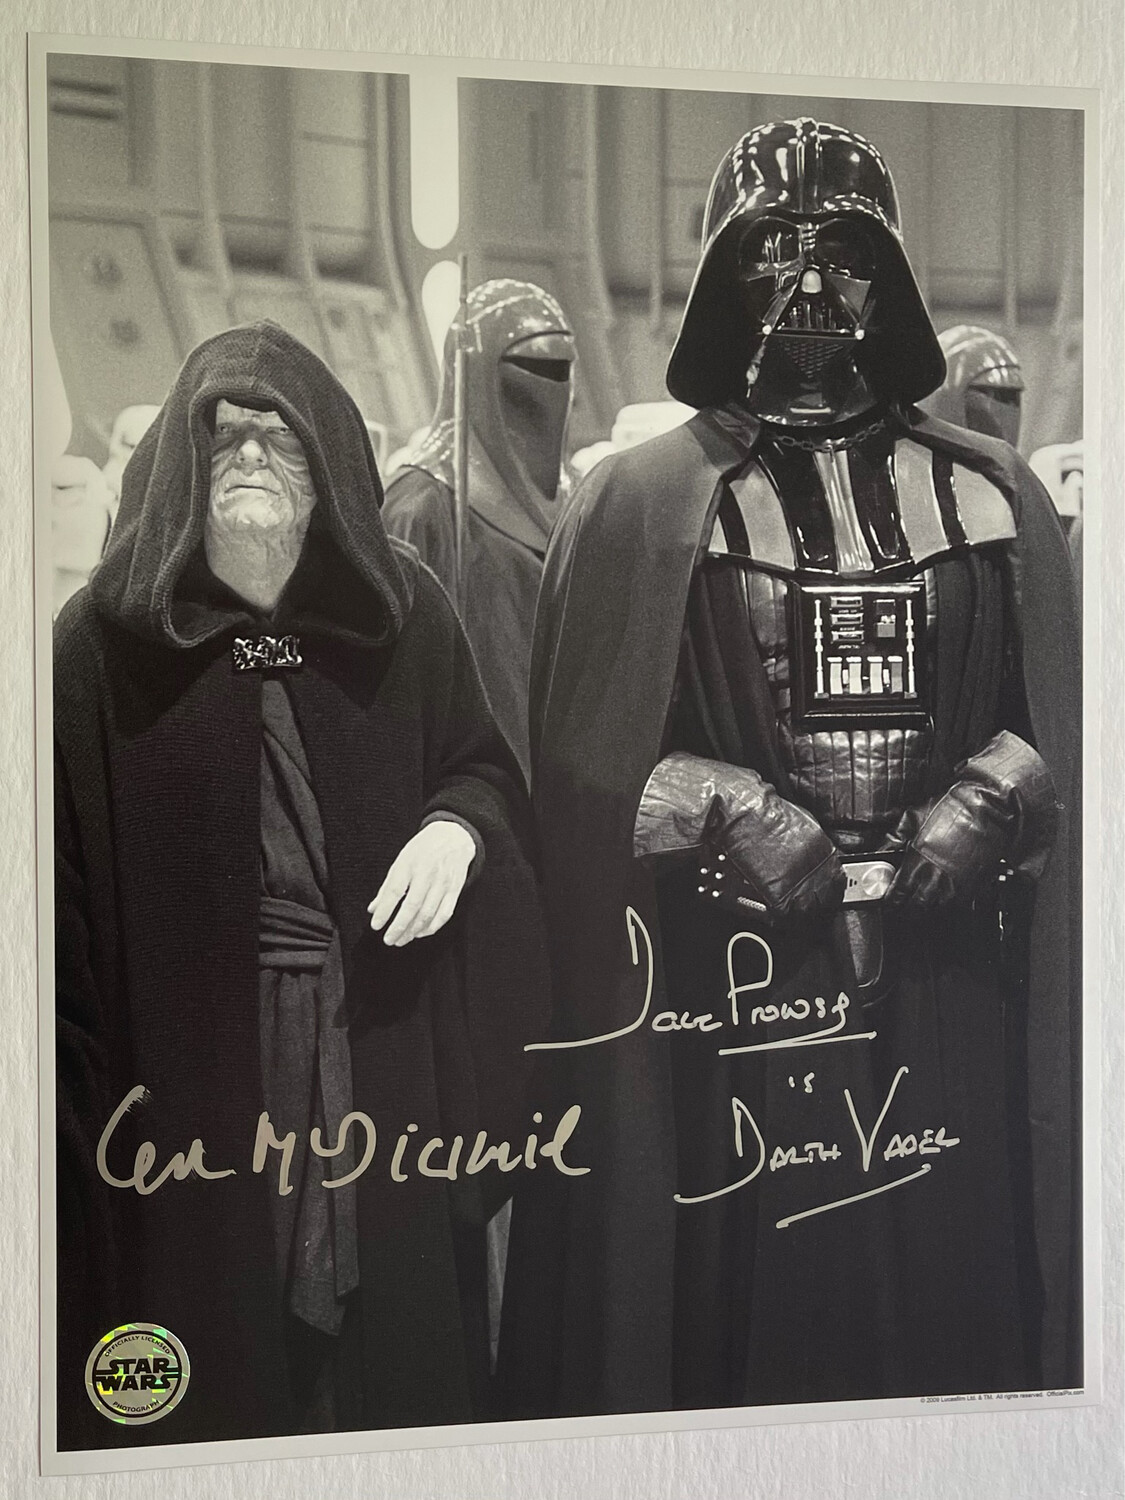 11X14 DARTH VADER PHOTO SIGNED BY DAVE PROWSE AND IAN MCDIARMID